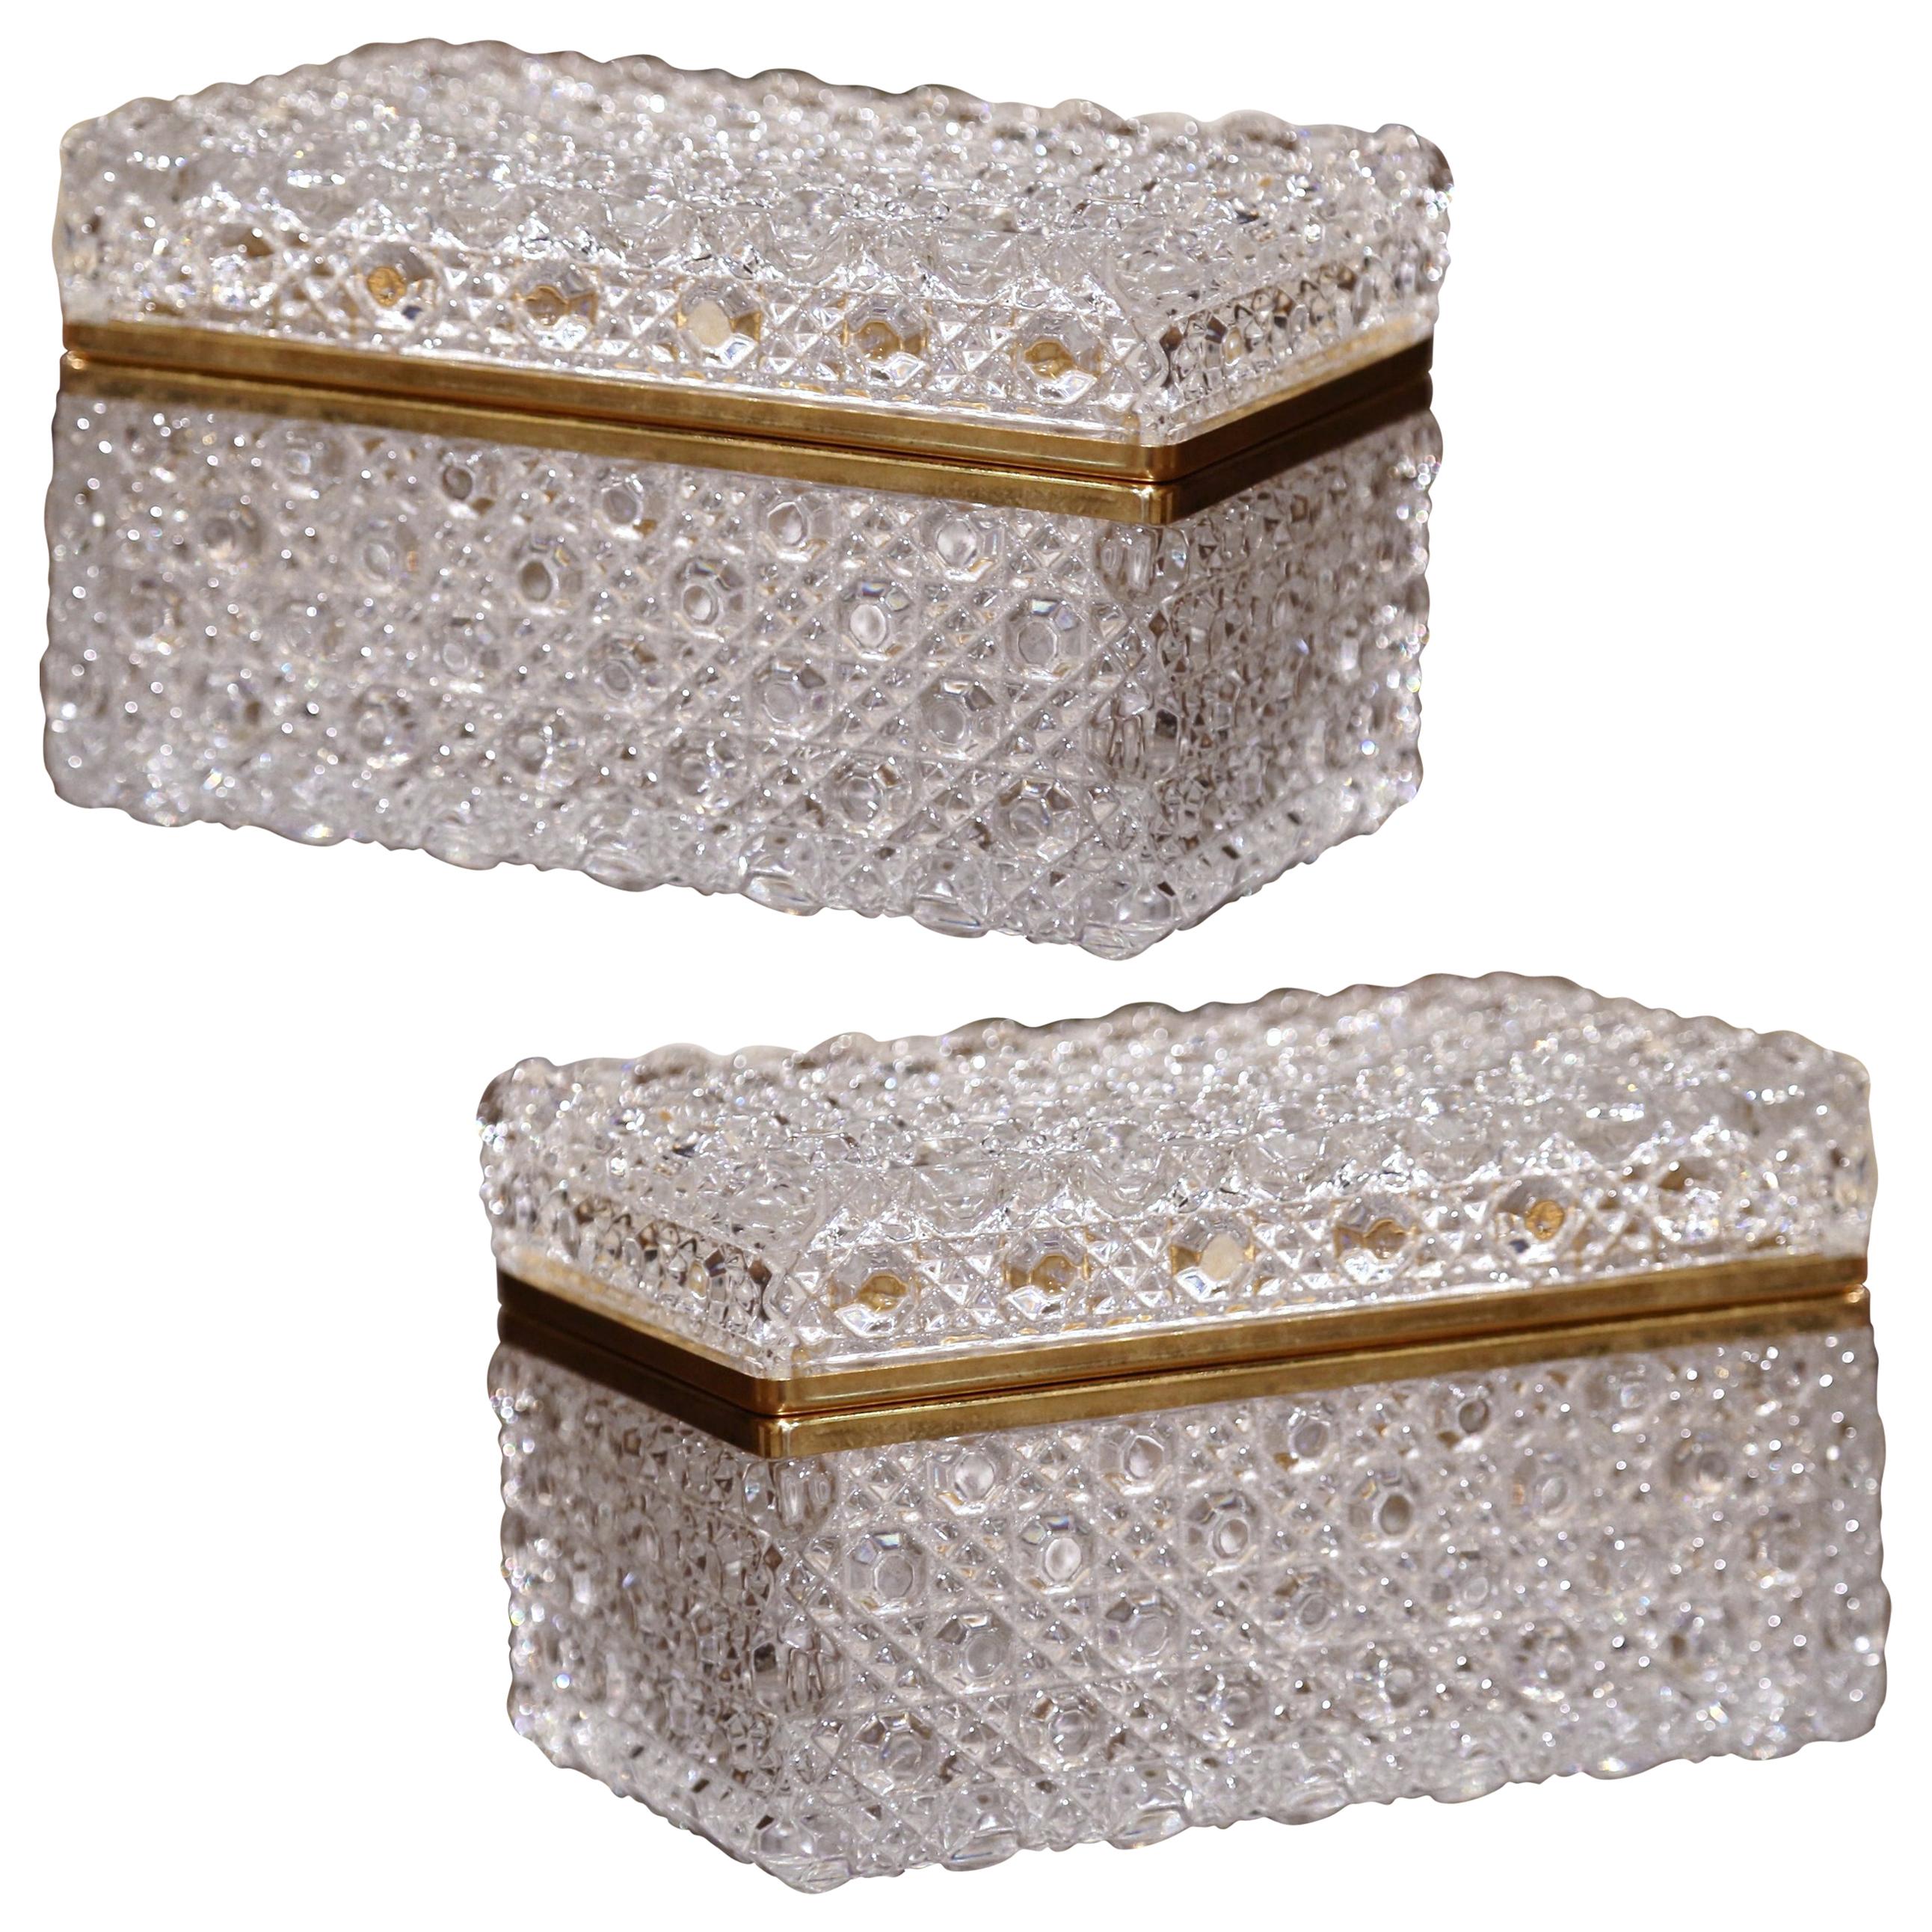 Pair of Early 20th Century French Baccarat Cut Glass and Brass Jewelry Boxes